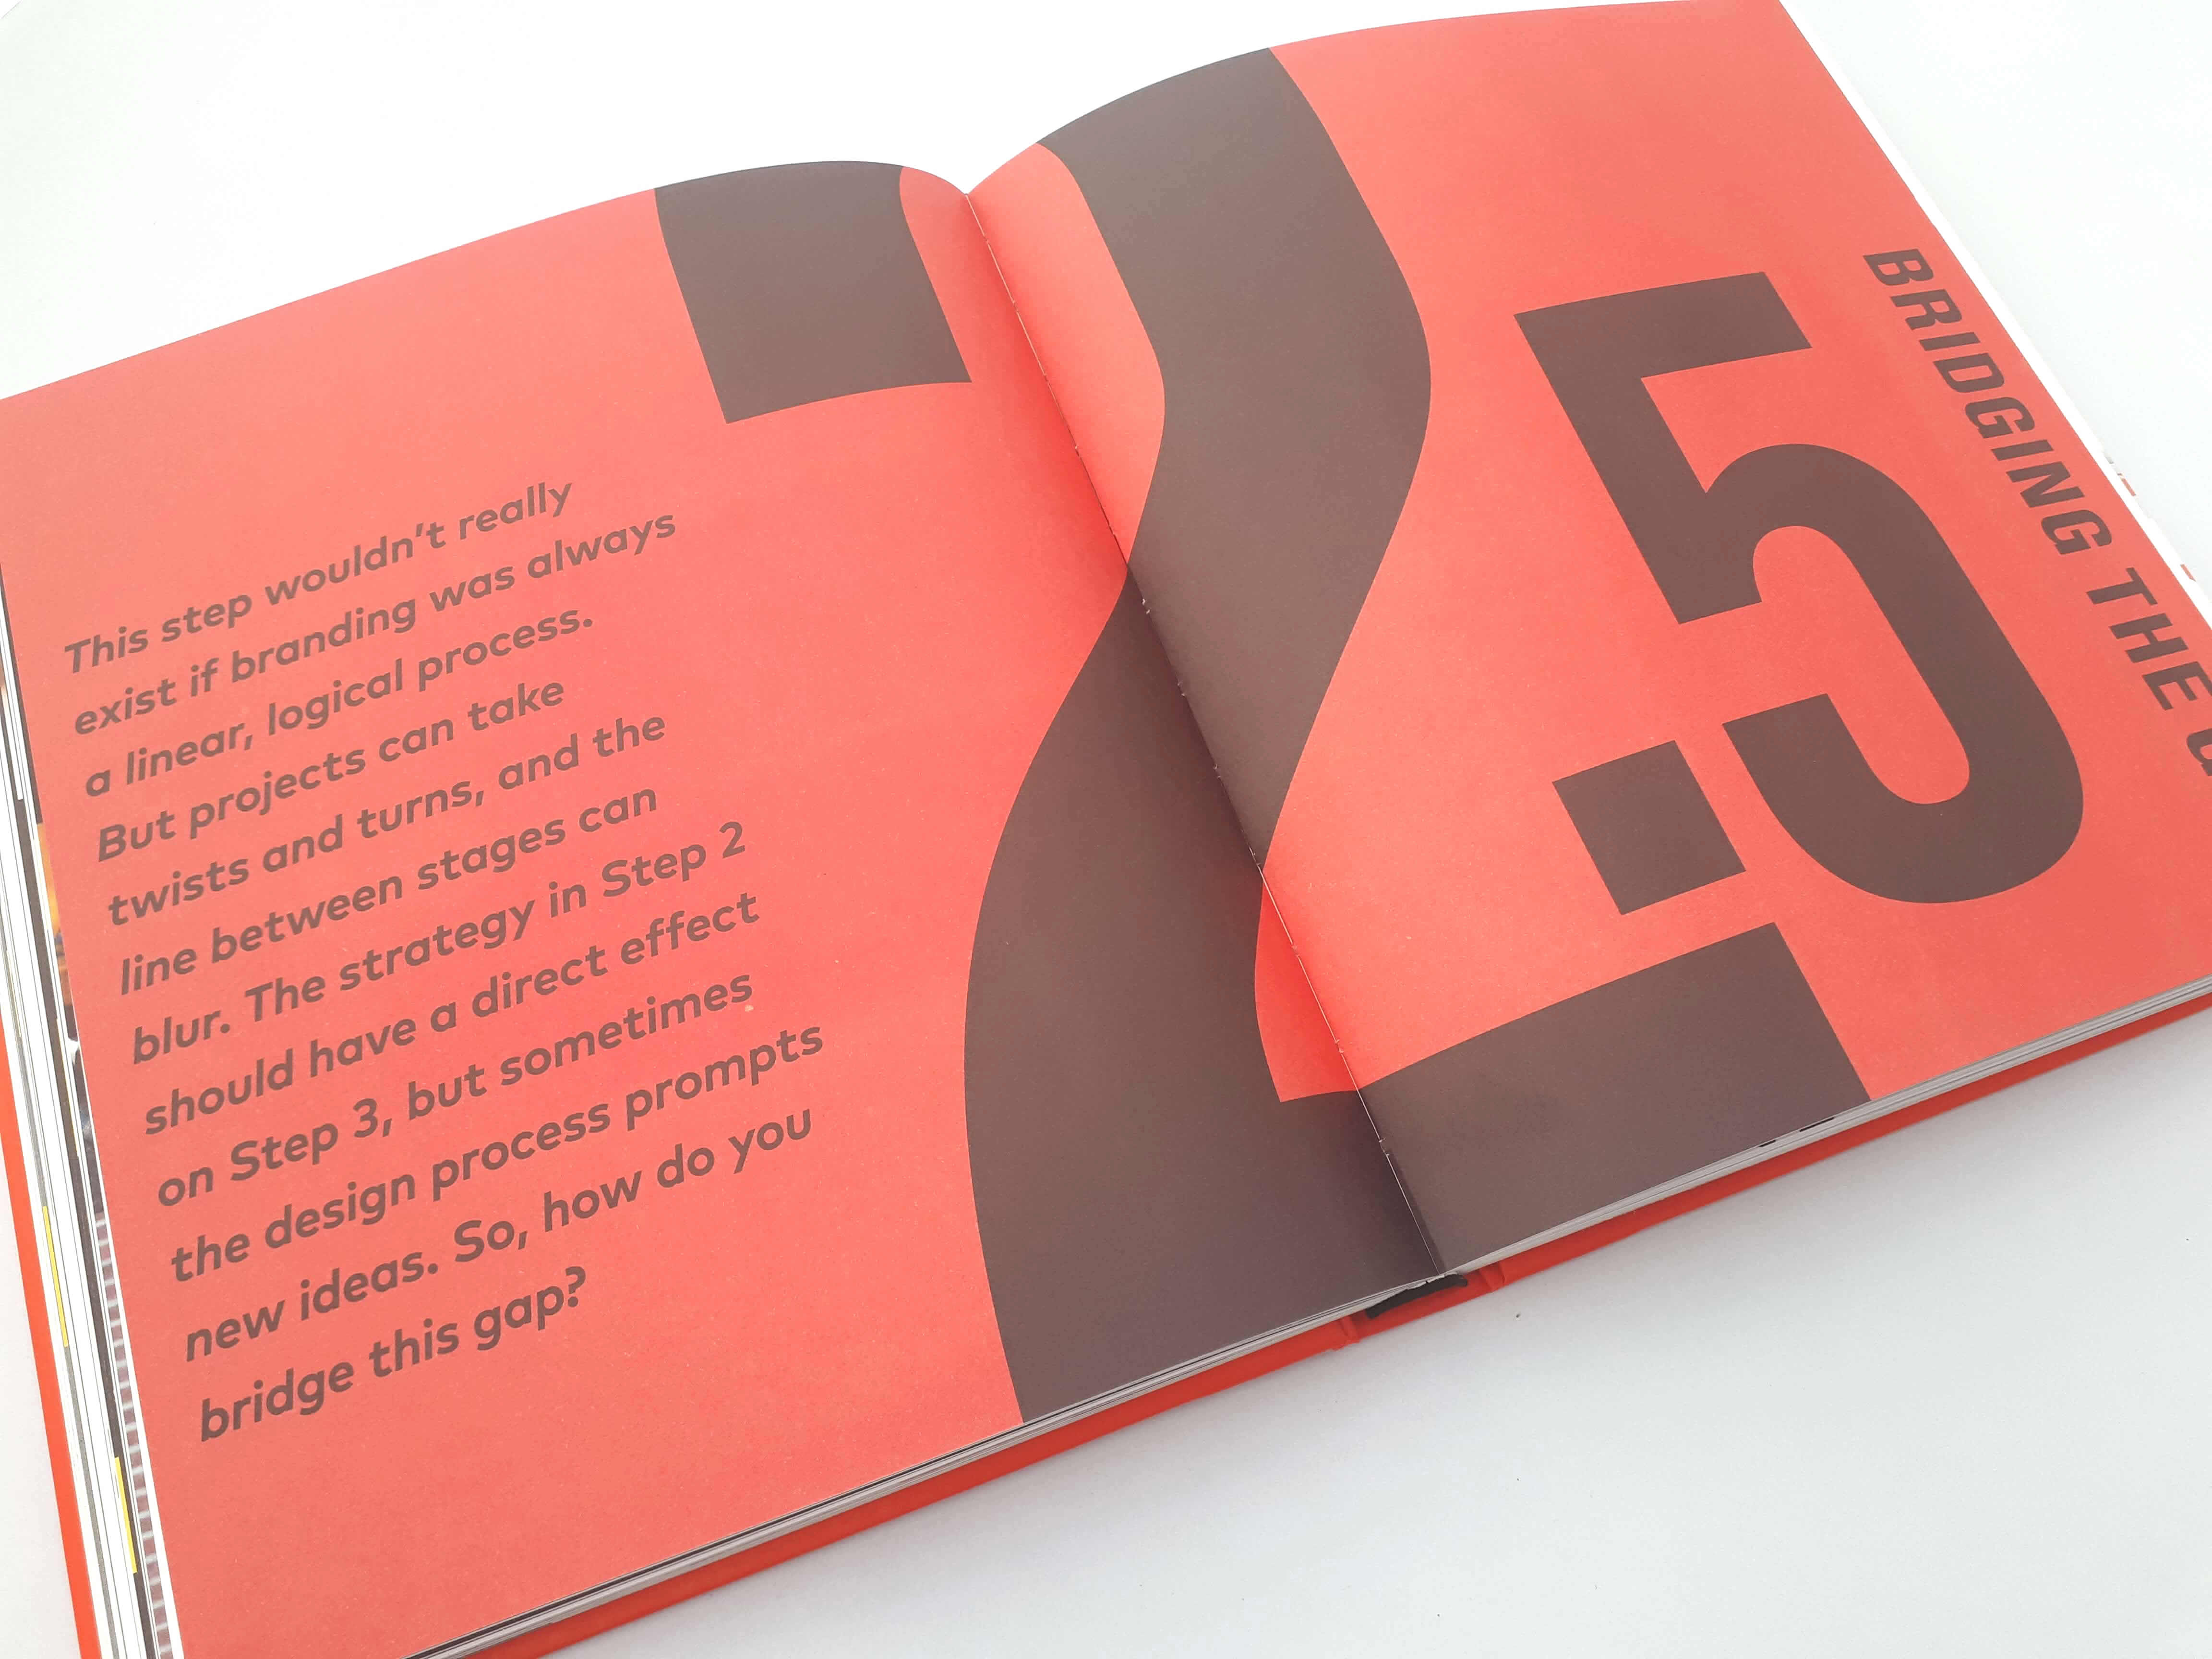 Branding in five and a half steps by Michael Johnson